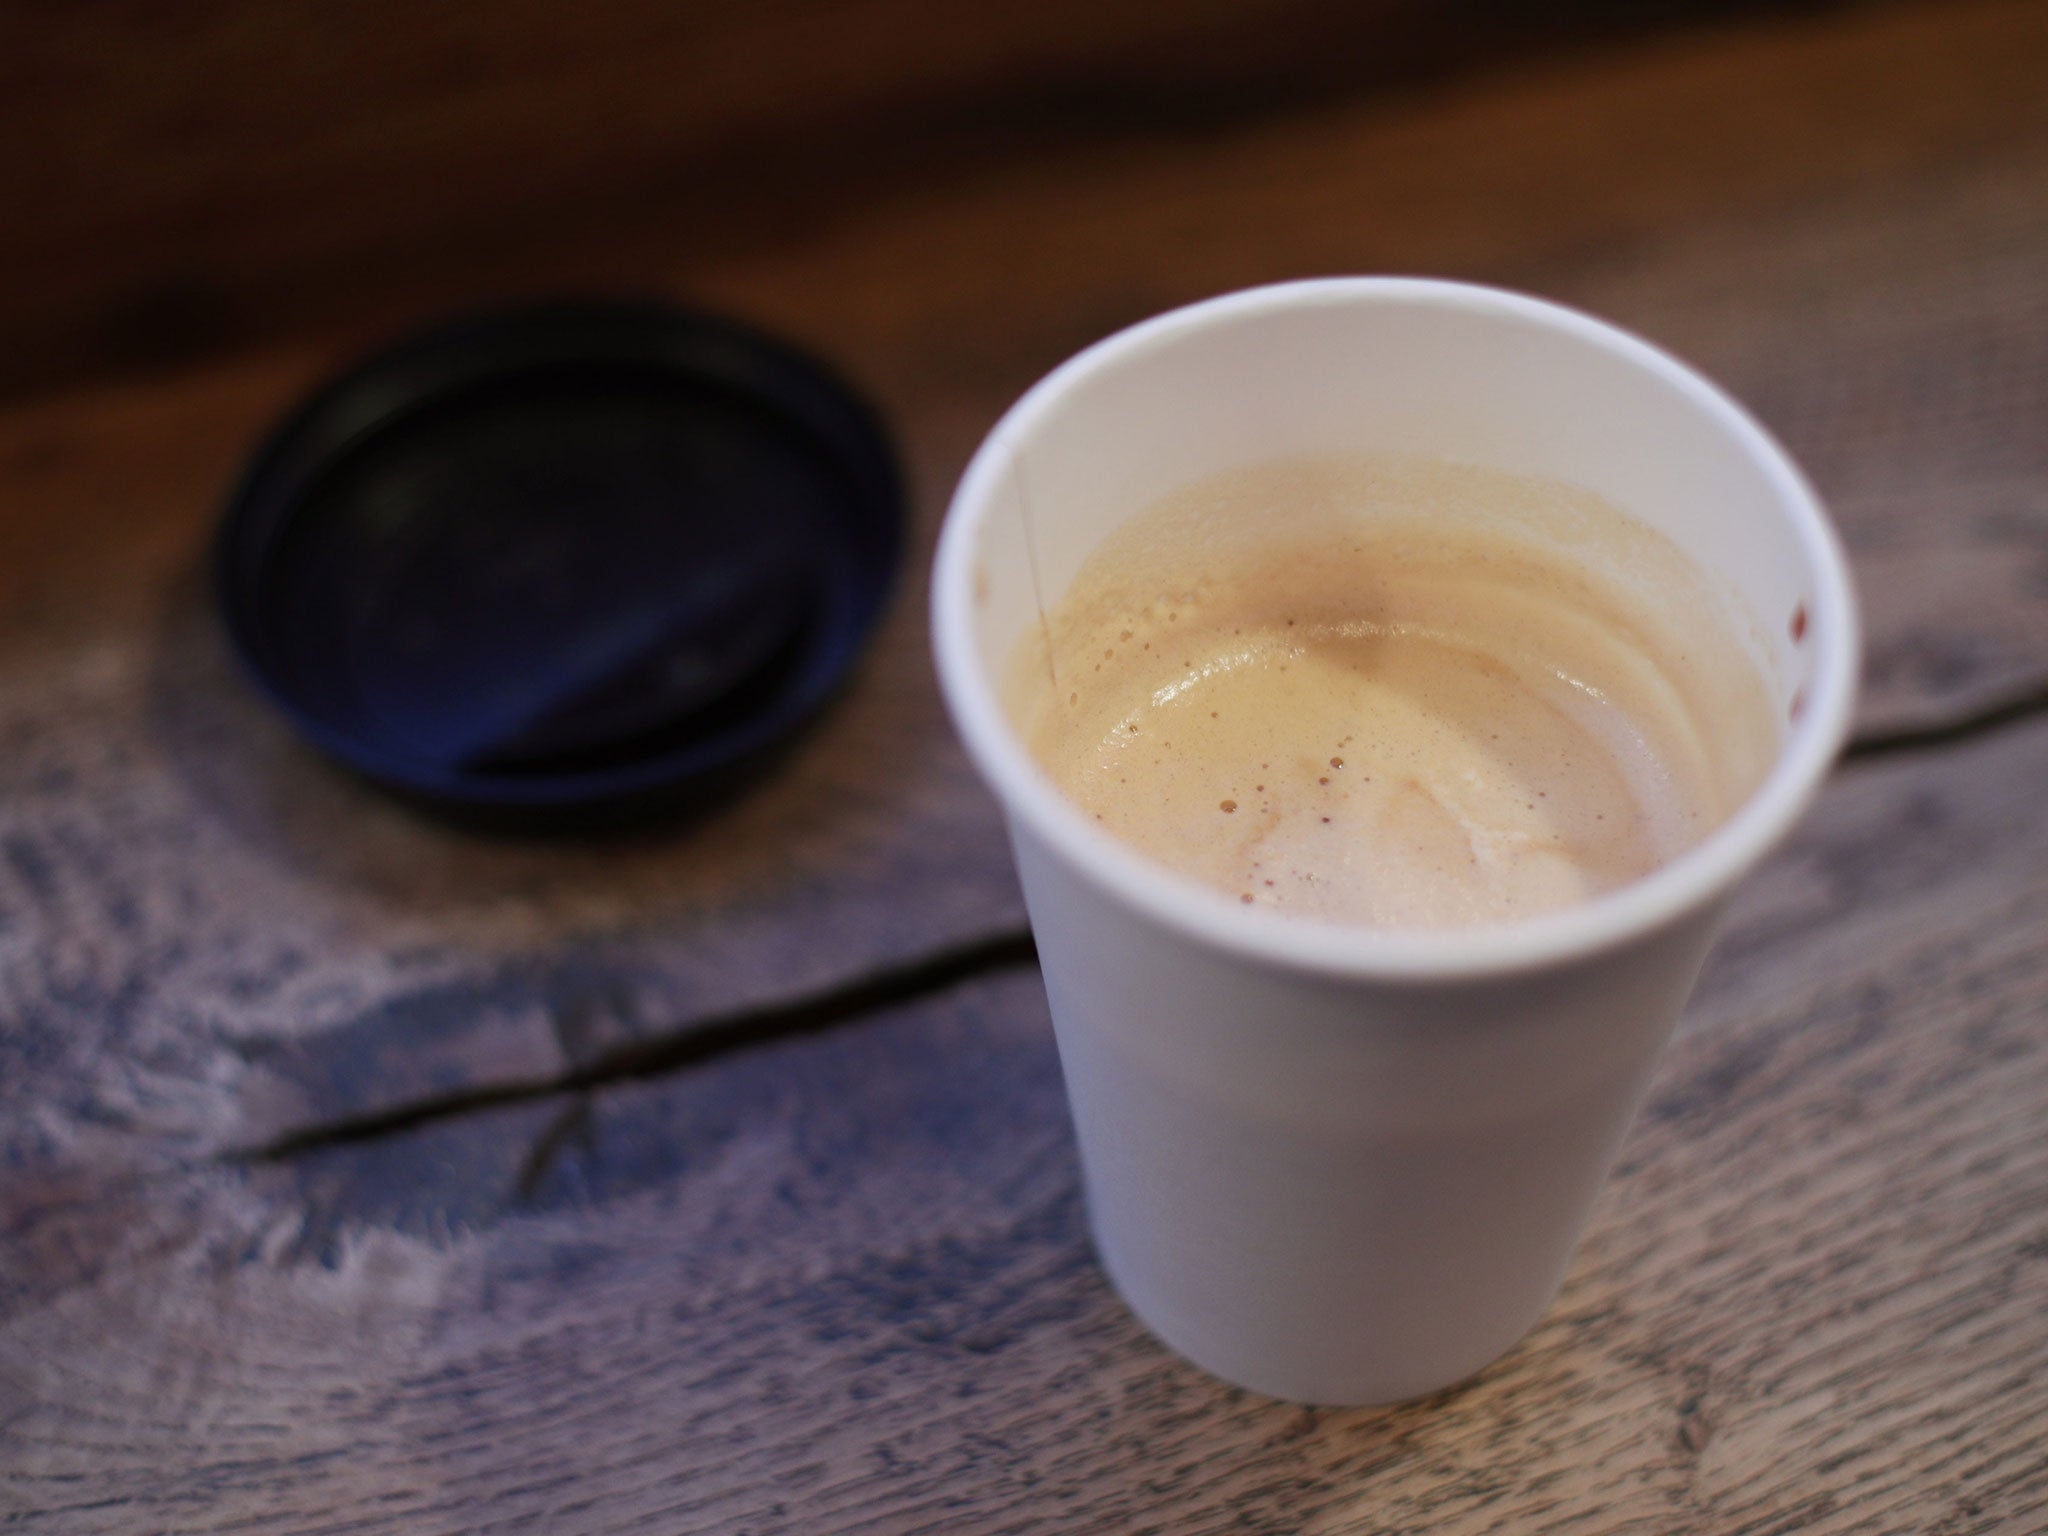 Hot drinks will be served in reusable ceramic mugs and staff have been encouraged to bring in their own mugs for takeaways